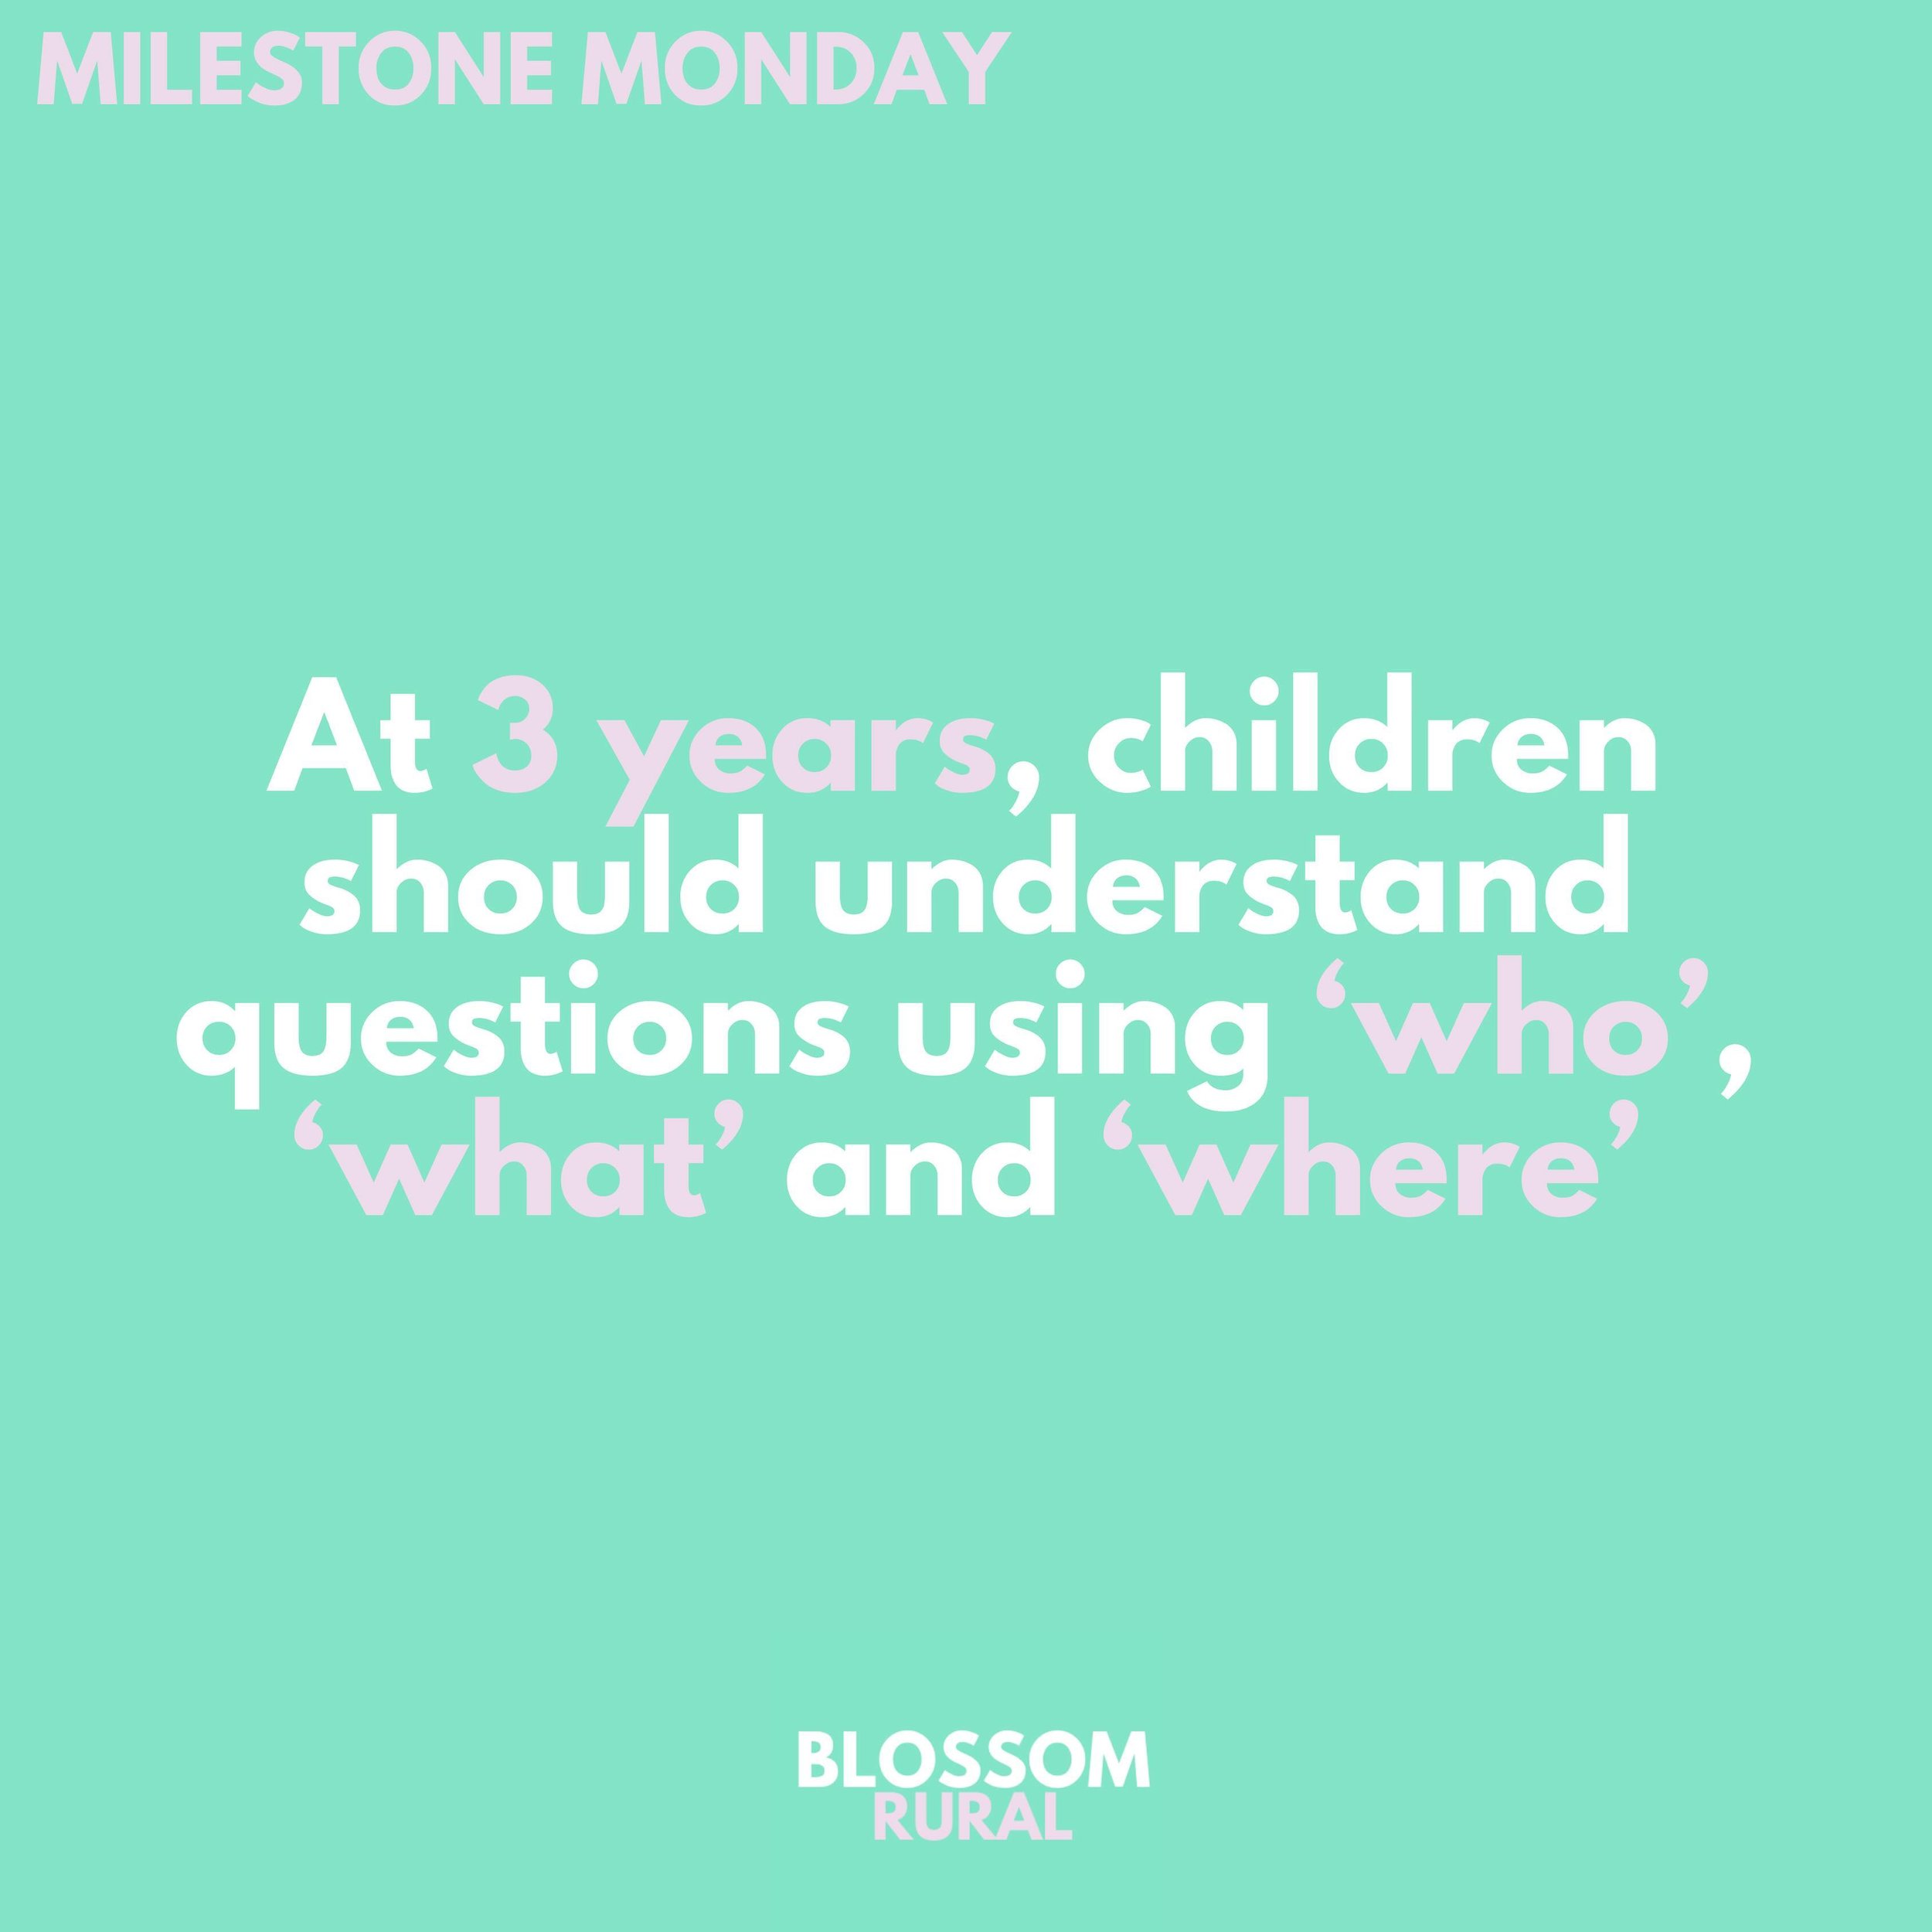 MILESTONE MONDAY ⭐

We&rsquo;re bringing it back 👏

By 3 years, children can usually understand questions similar to the following:

🌸 &ldquo;Who opened the door?&rdquo;
🌸 &ldquo;What&rsquo;s your name?&rdquo;
🌸 &ldquo;When did he leave?&rdquo;

